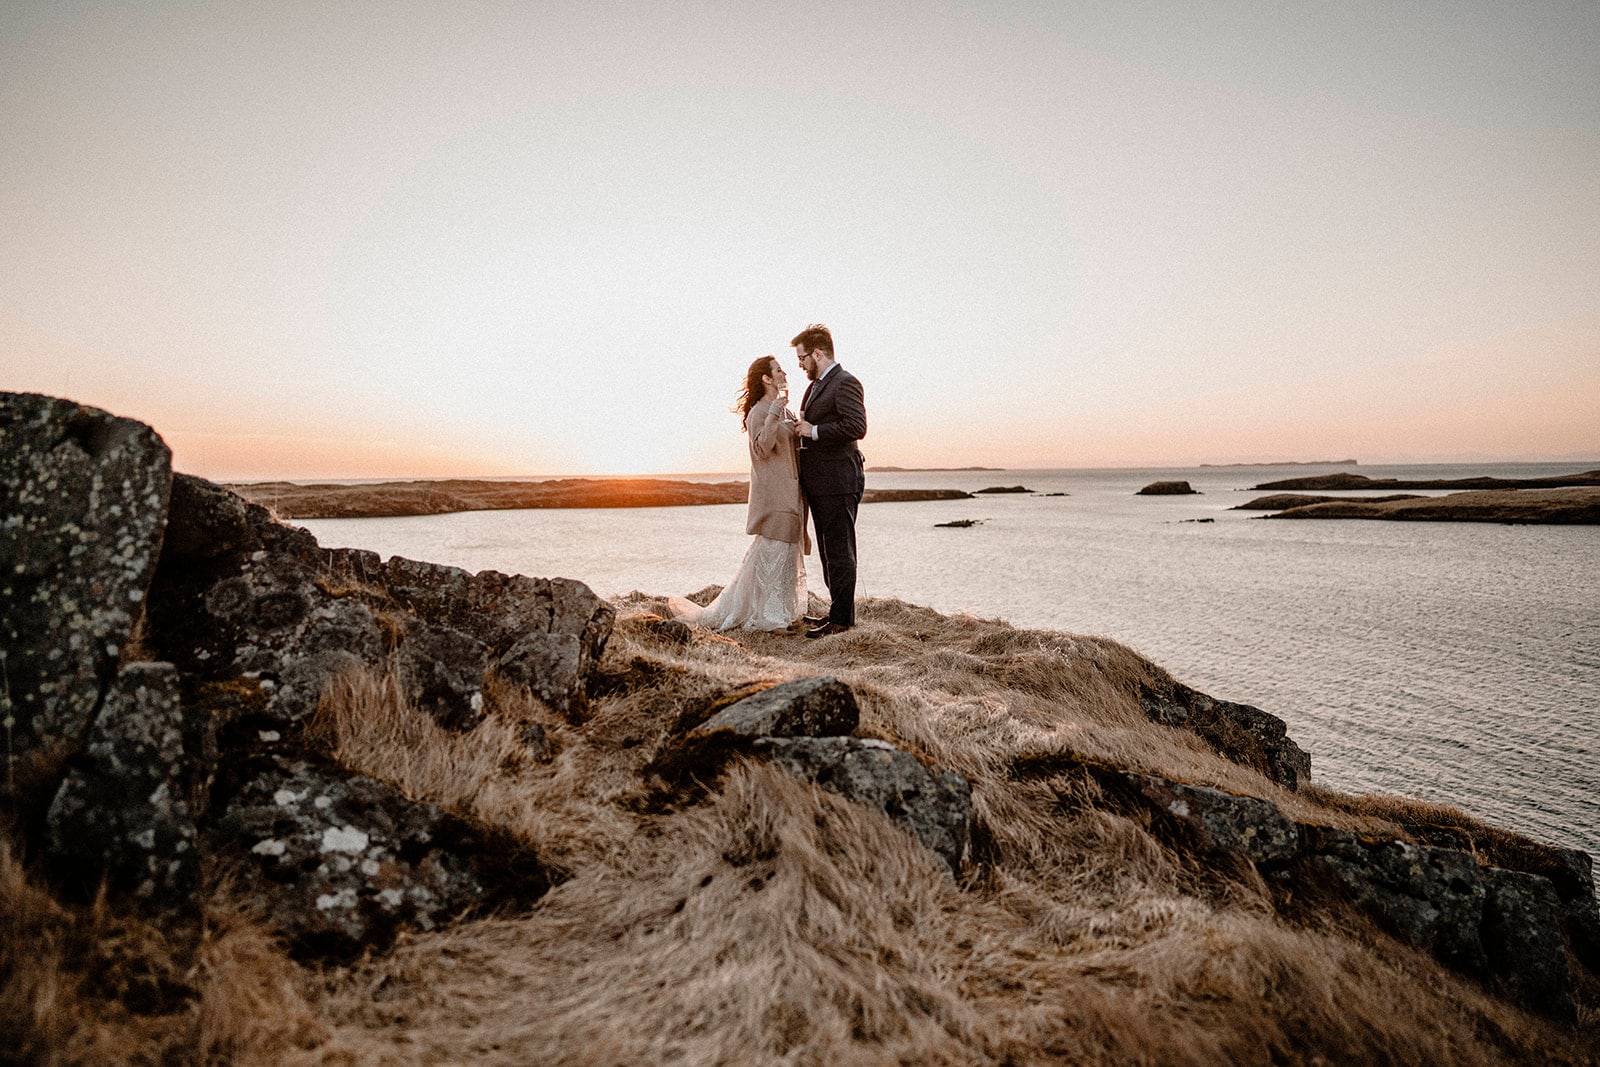 Captivating Moments: Bride and Groom Embracing by Western Iceland's Sea